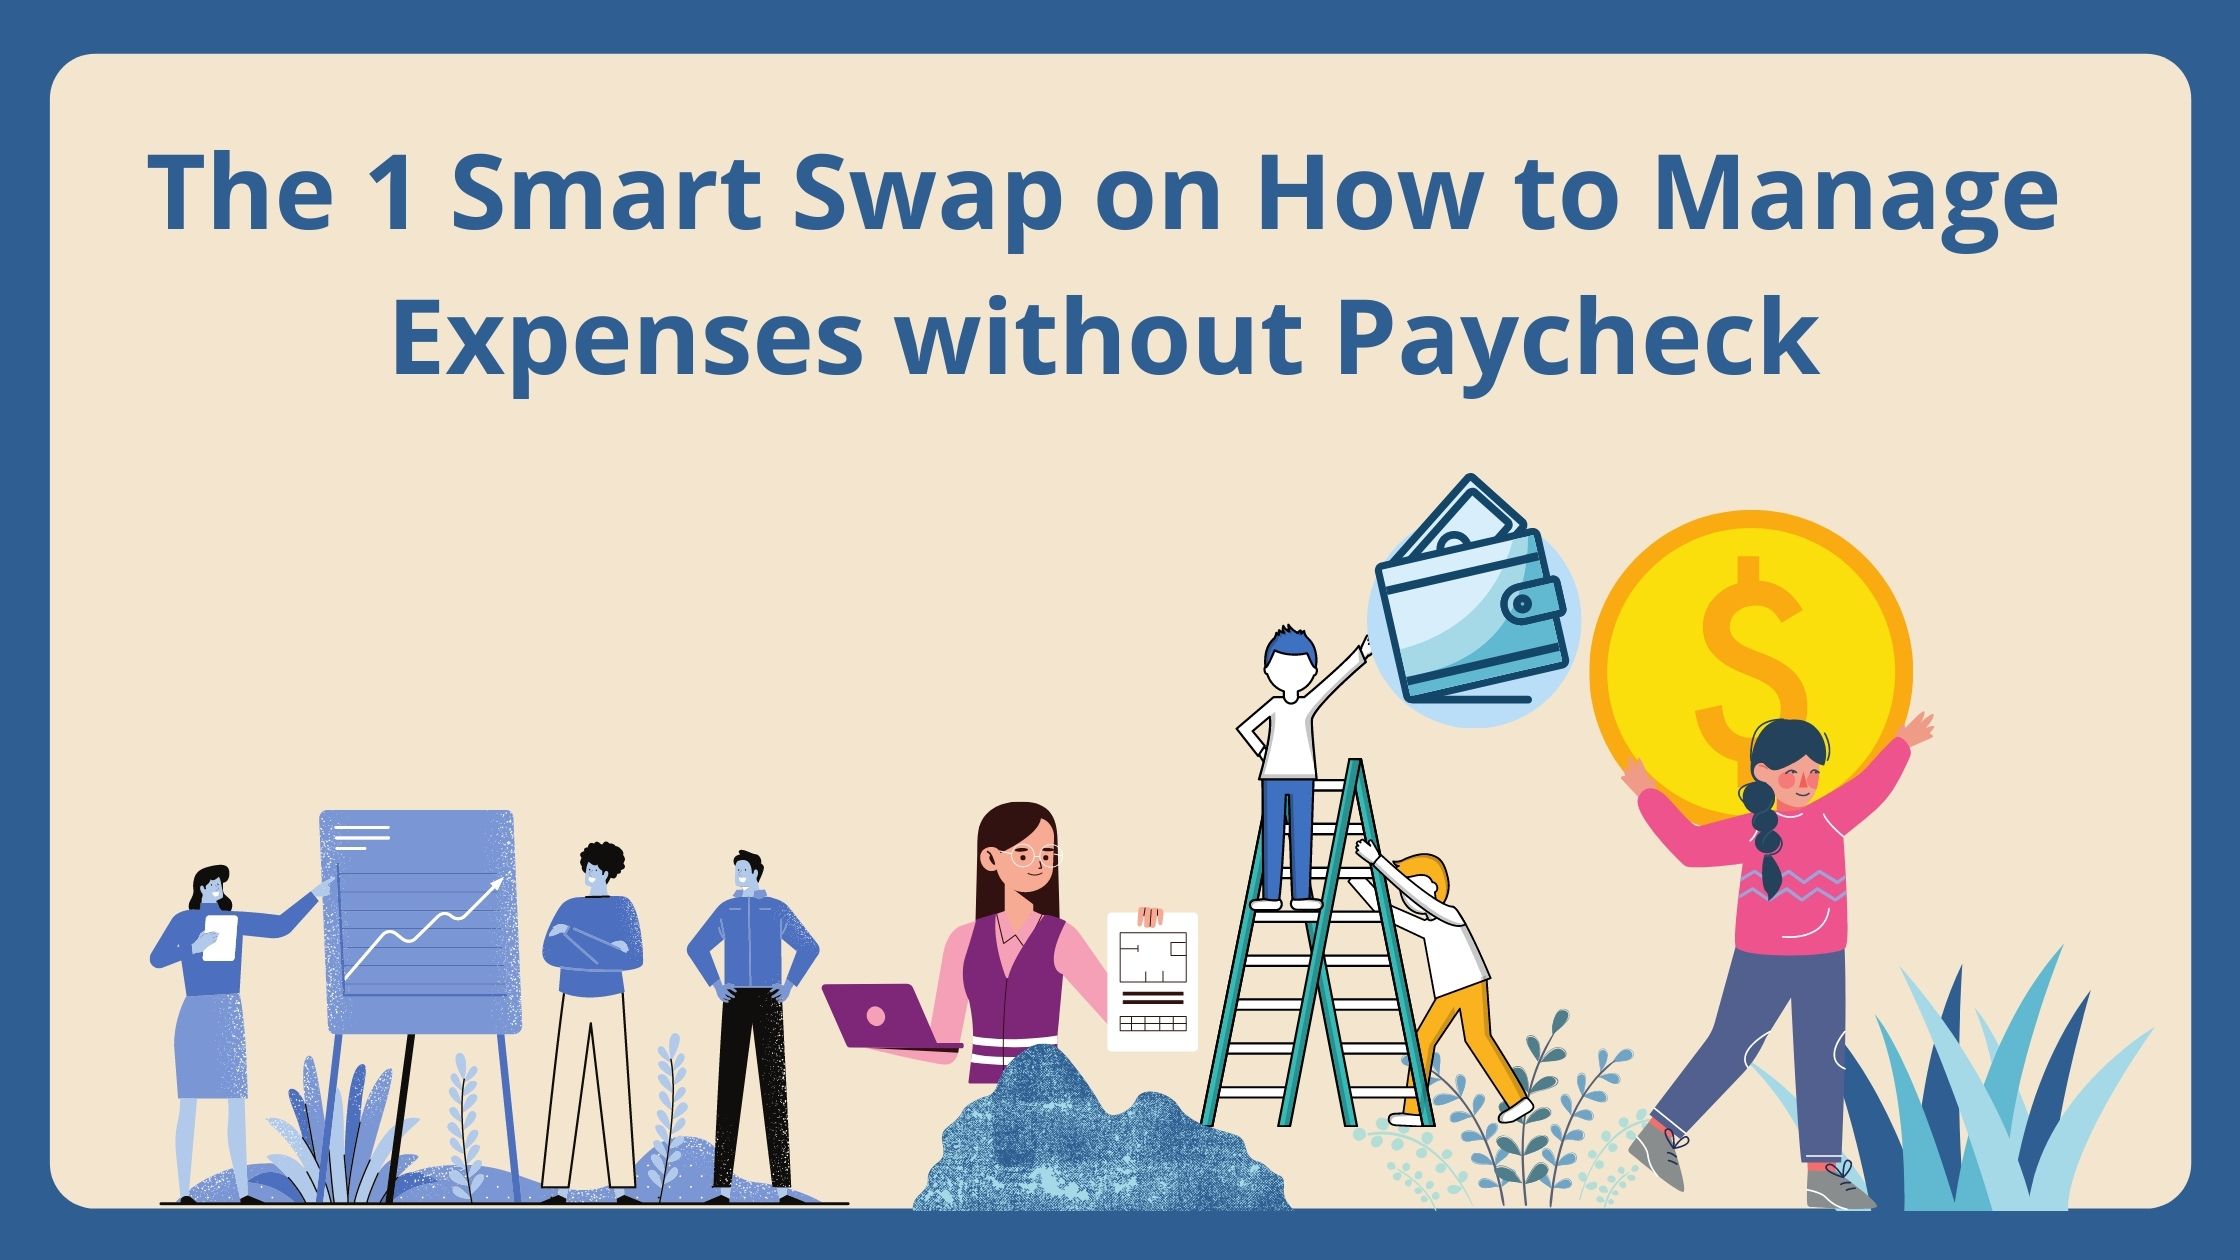 The #1 Smart Swap on How to Manage Expenses without Paycheck